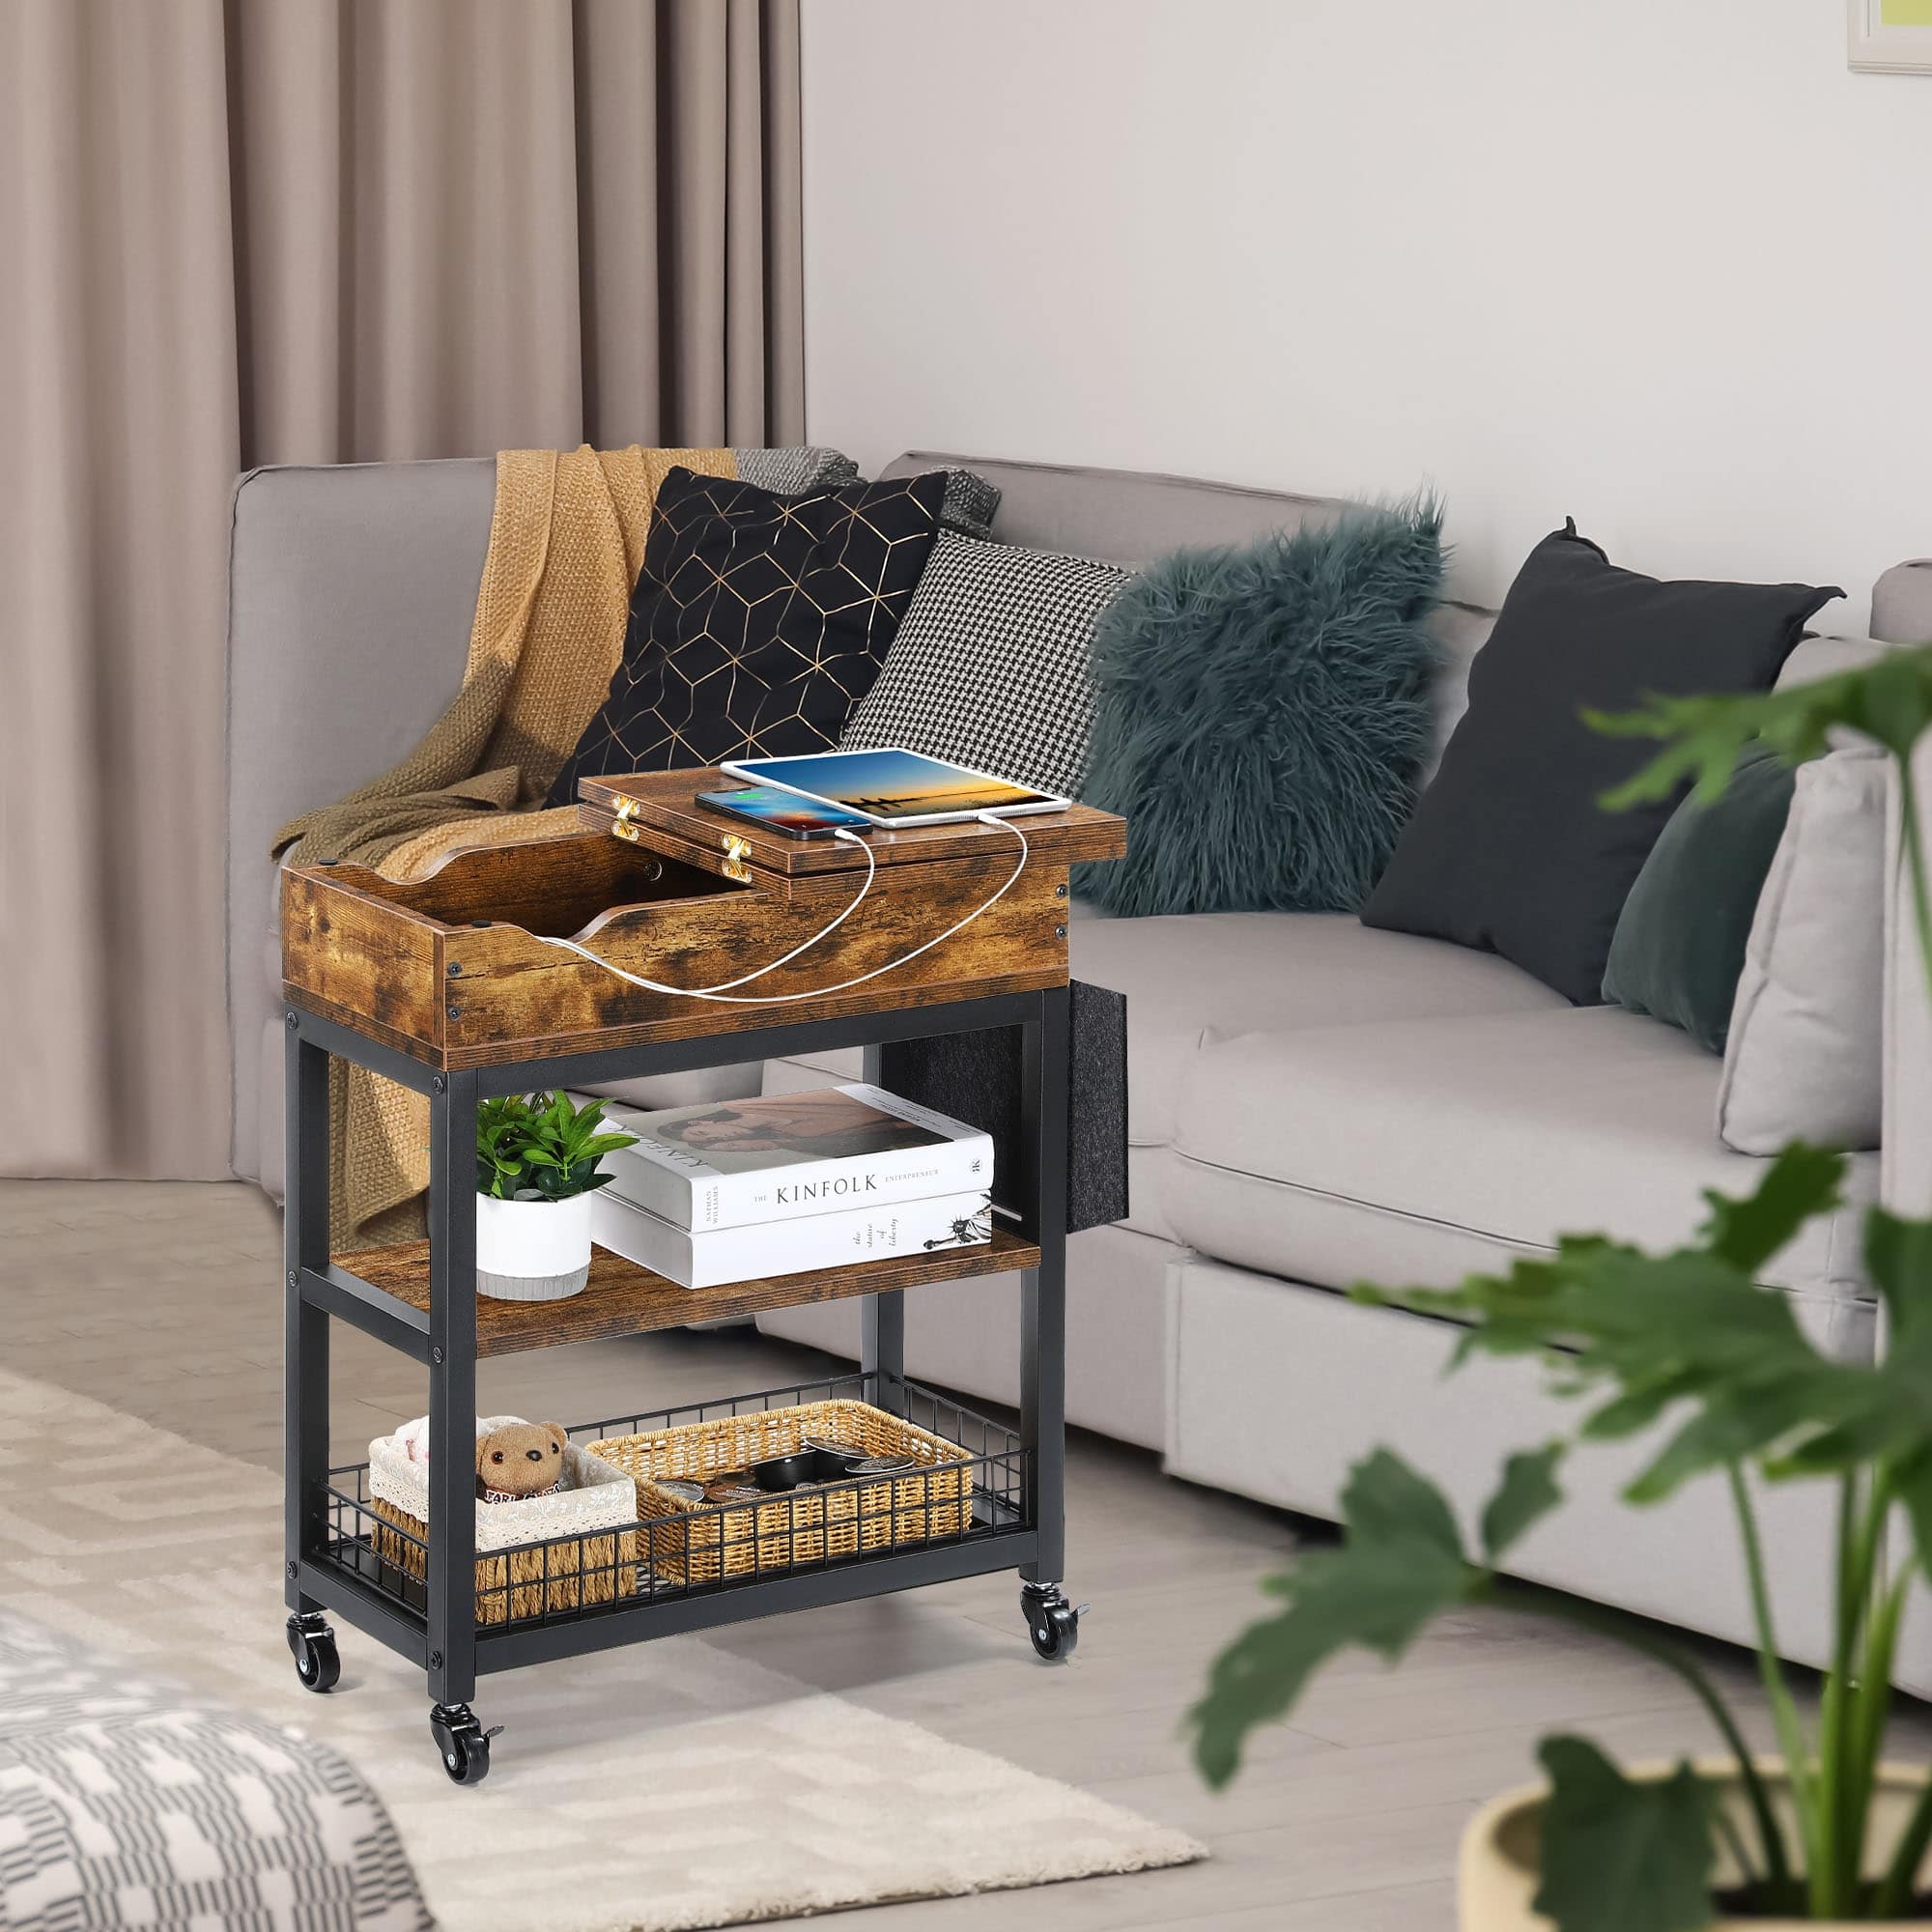 End Table with Charging Station Storage Bag - Bed Bath & Beyond - 36867284